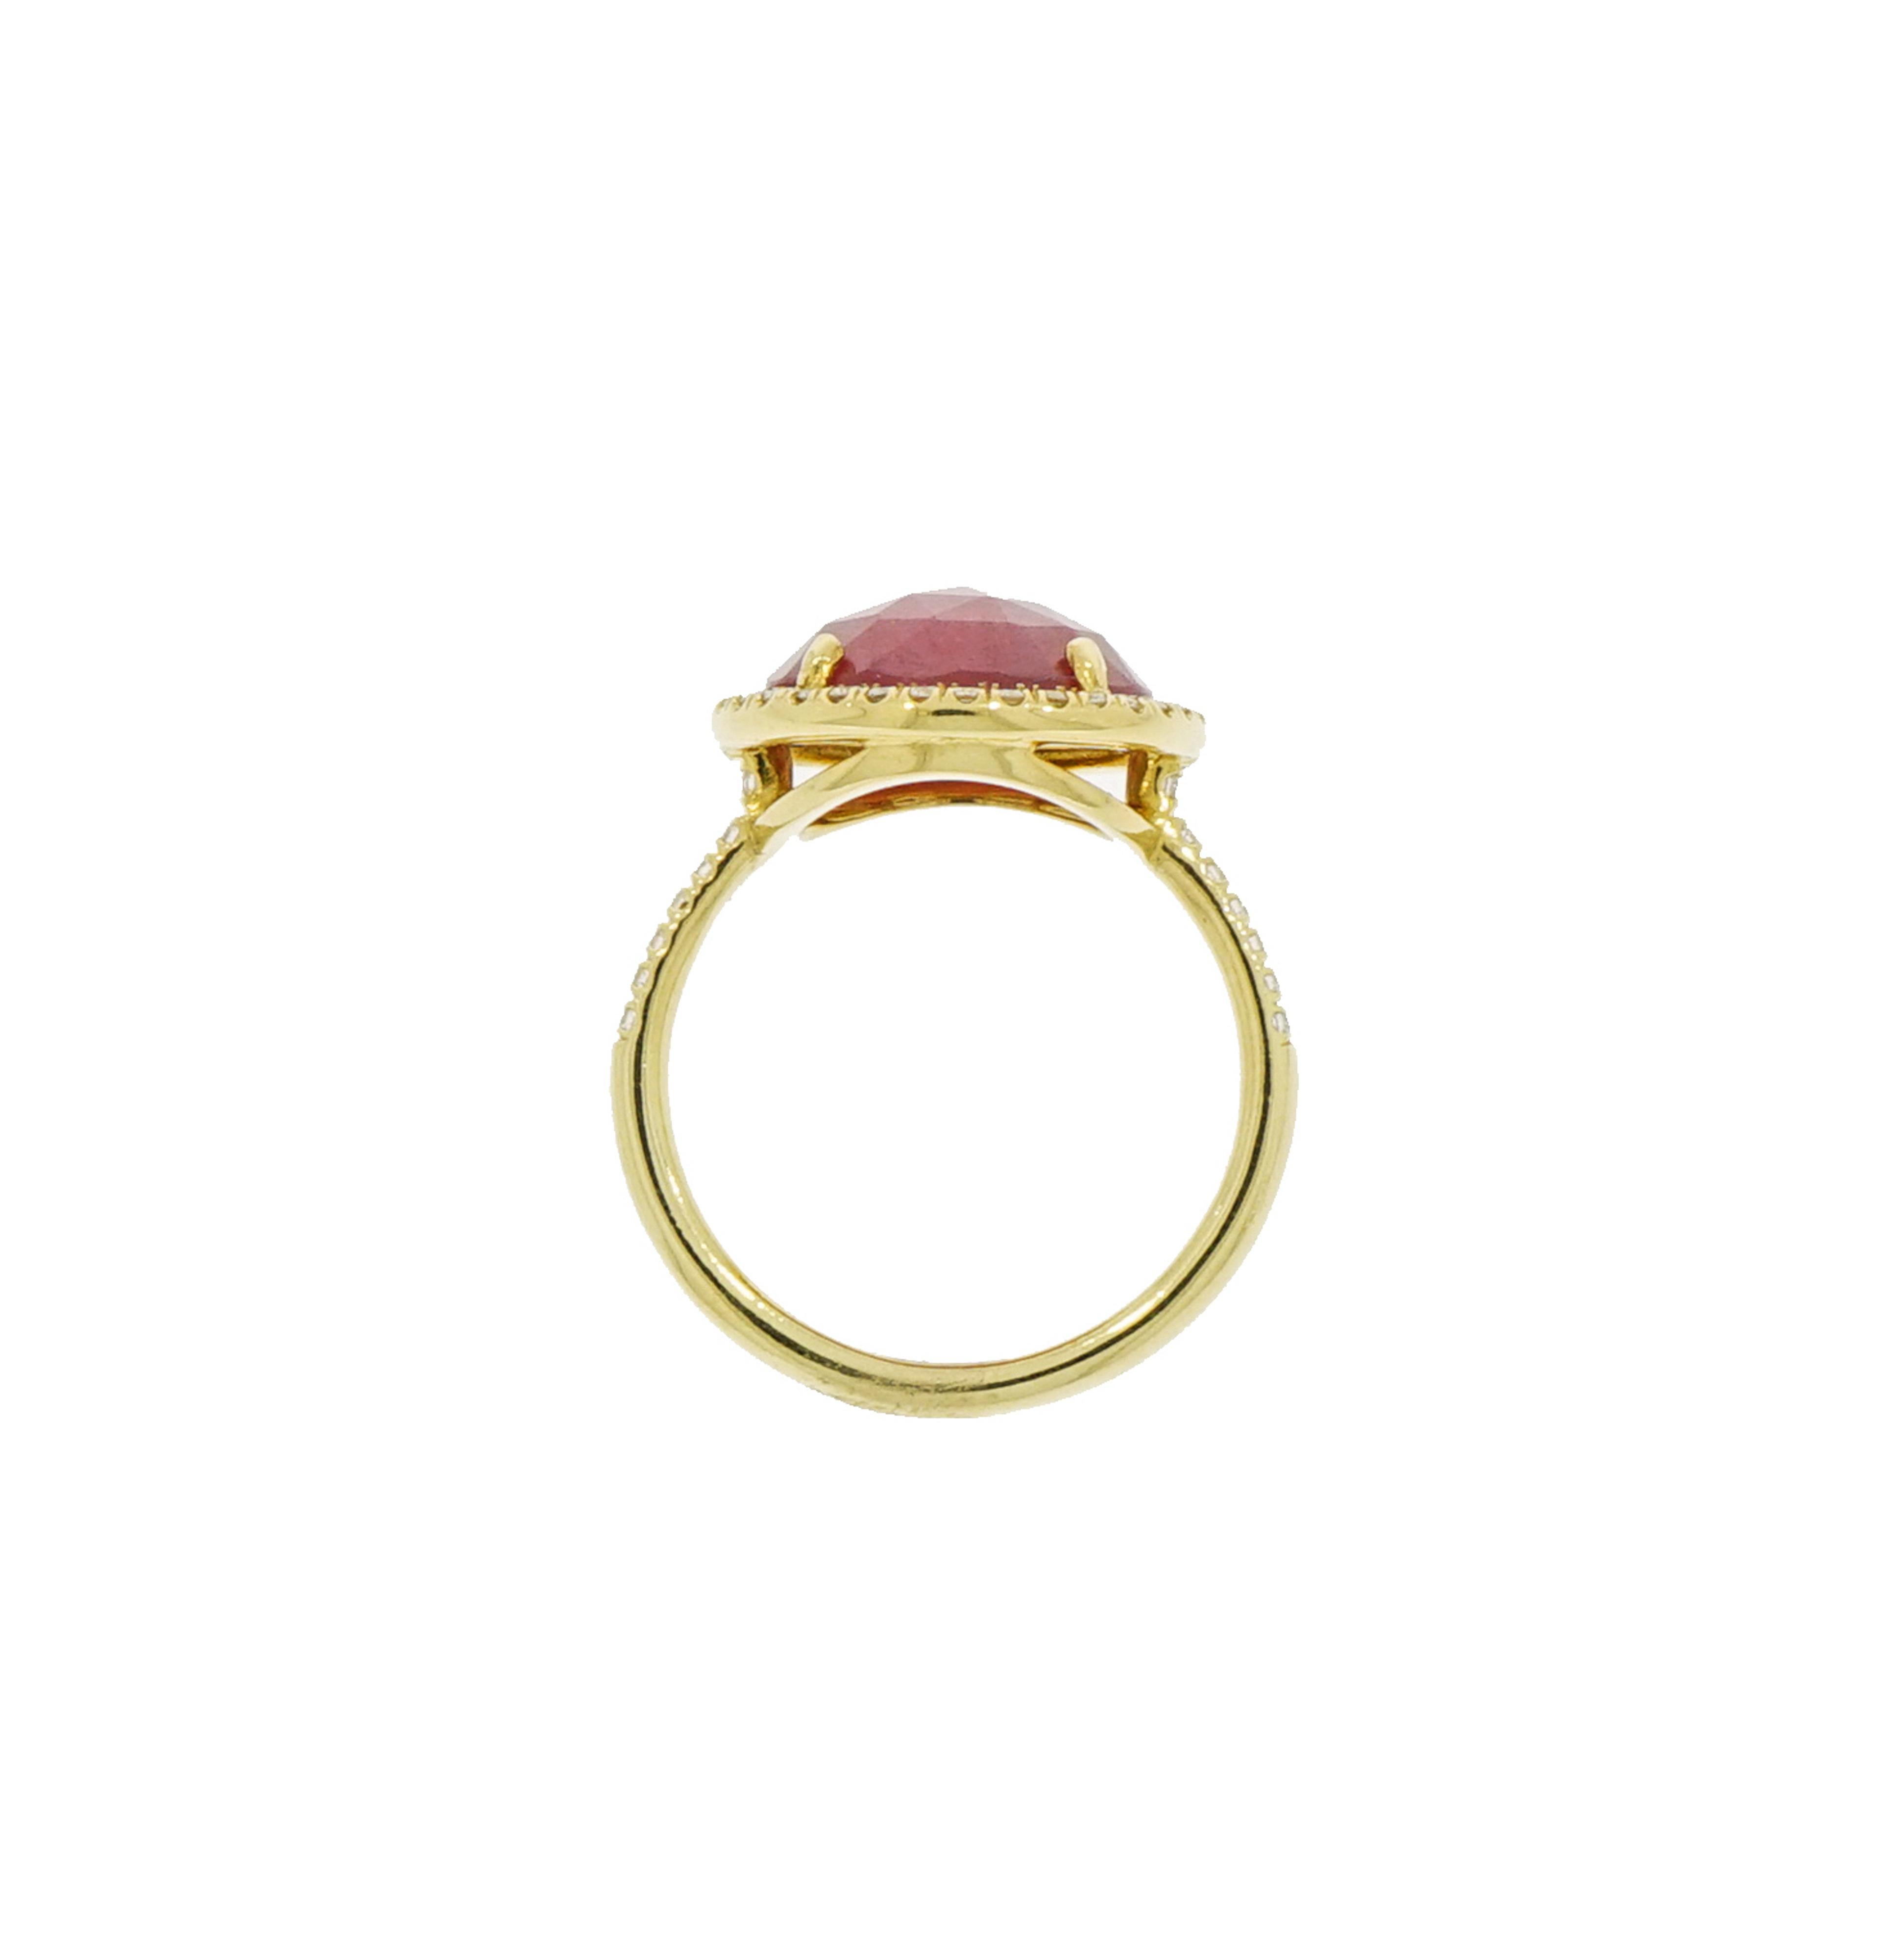 The simplicity of a geometric shape is key to the design of this Round Pink Sapphire and Diamond Ring.
Designed and crafted in NYC by Lauren K, this precious Opaque Pink Sapphire is embellished with a halo of white diamonds set in 18k yellow gold